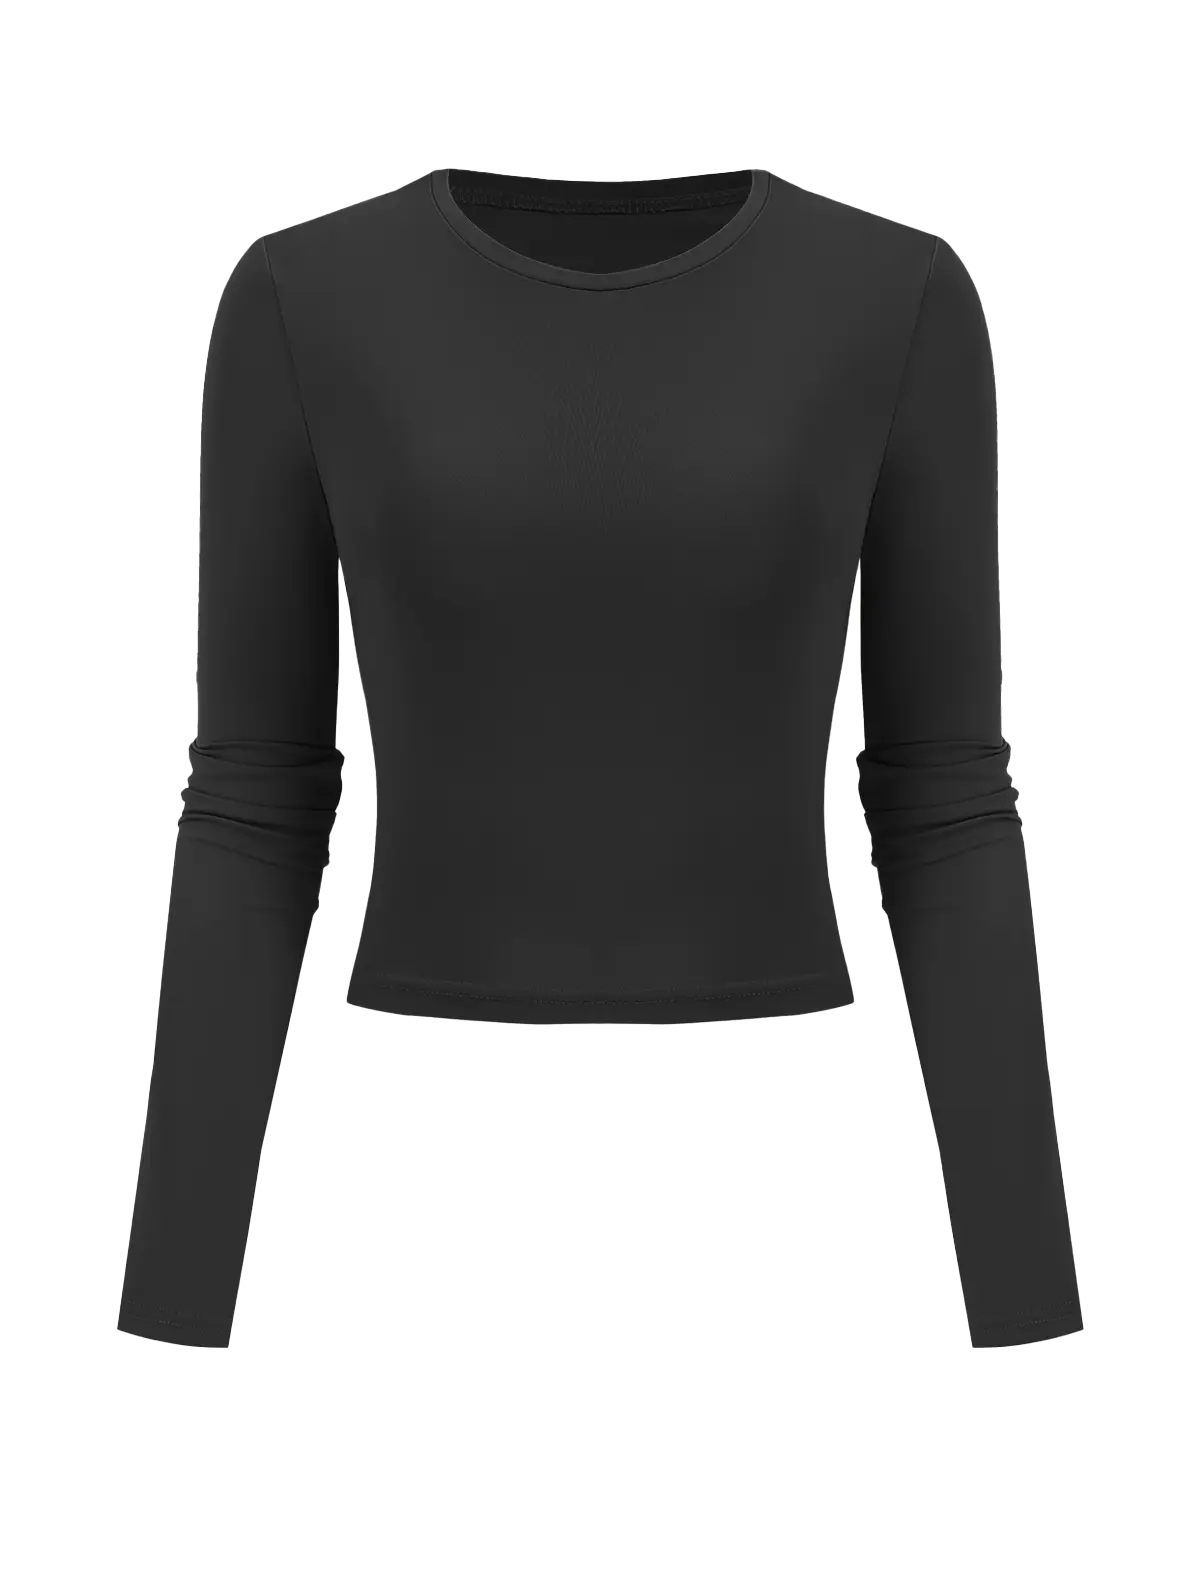 Solid Color Slim Round Collar Long Sleeves Top